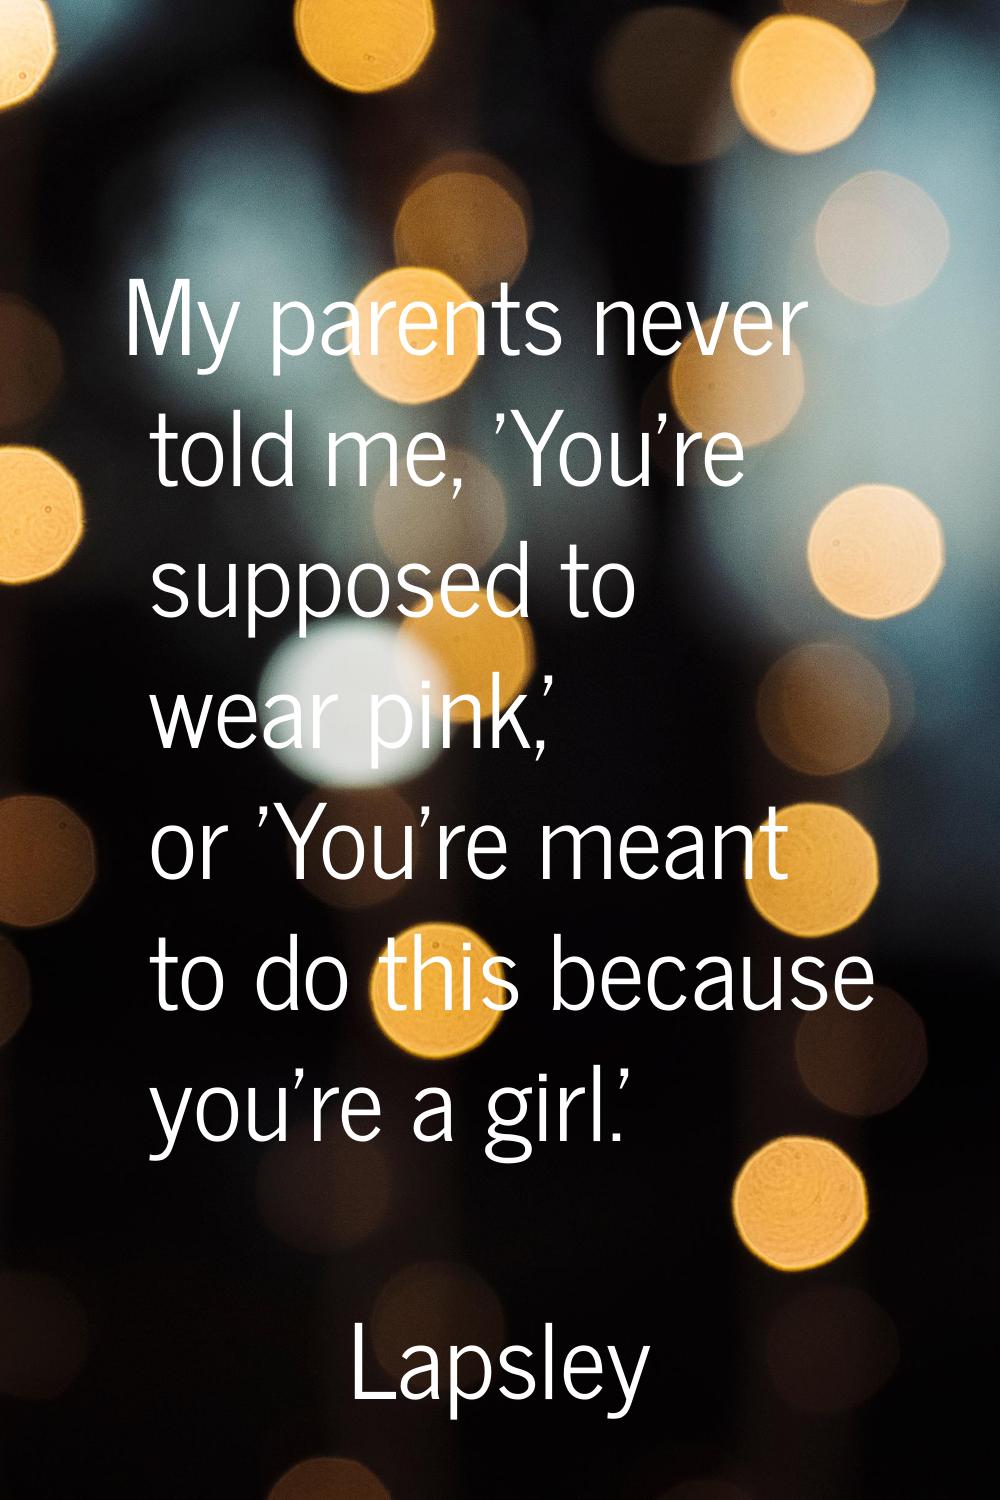 My parents never told me, 'You're supposed to wear pink,' or 'You're meant to do this because you'r